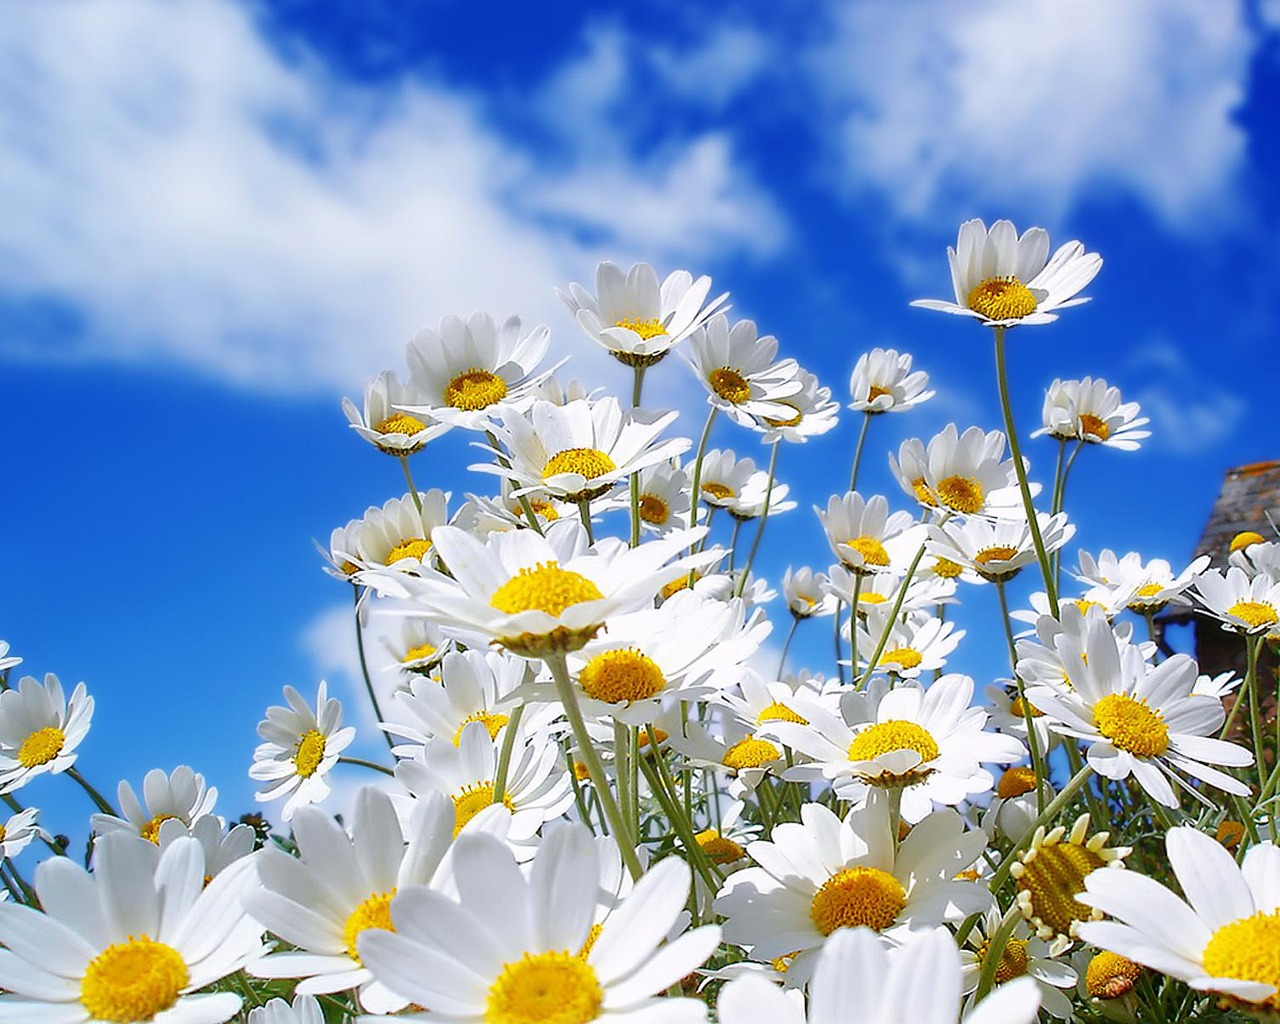 Spring Daisies Wallpaper Flowers Nature In Jpg Format For